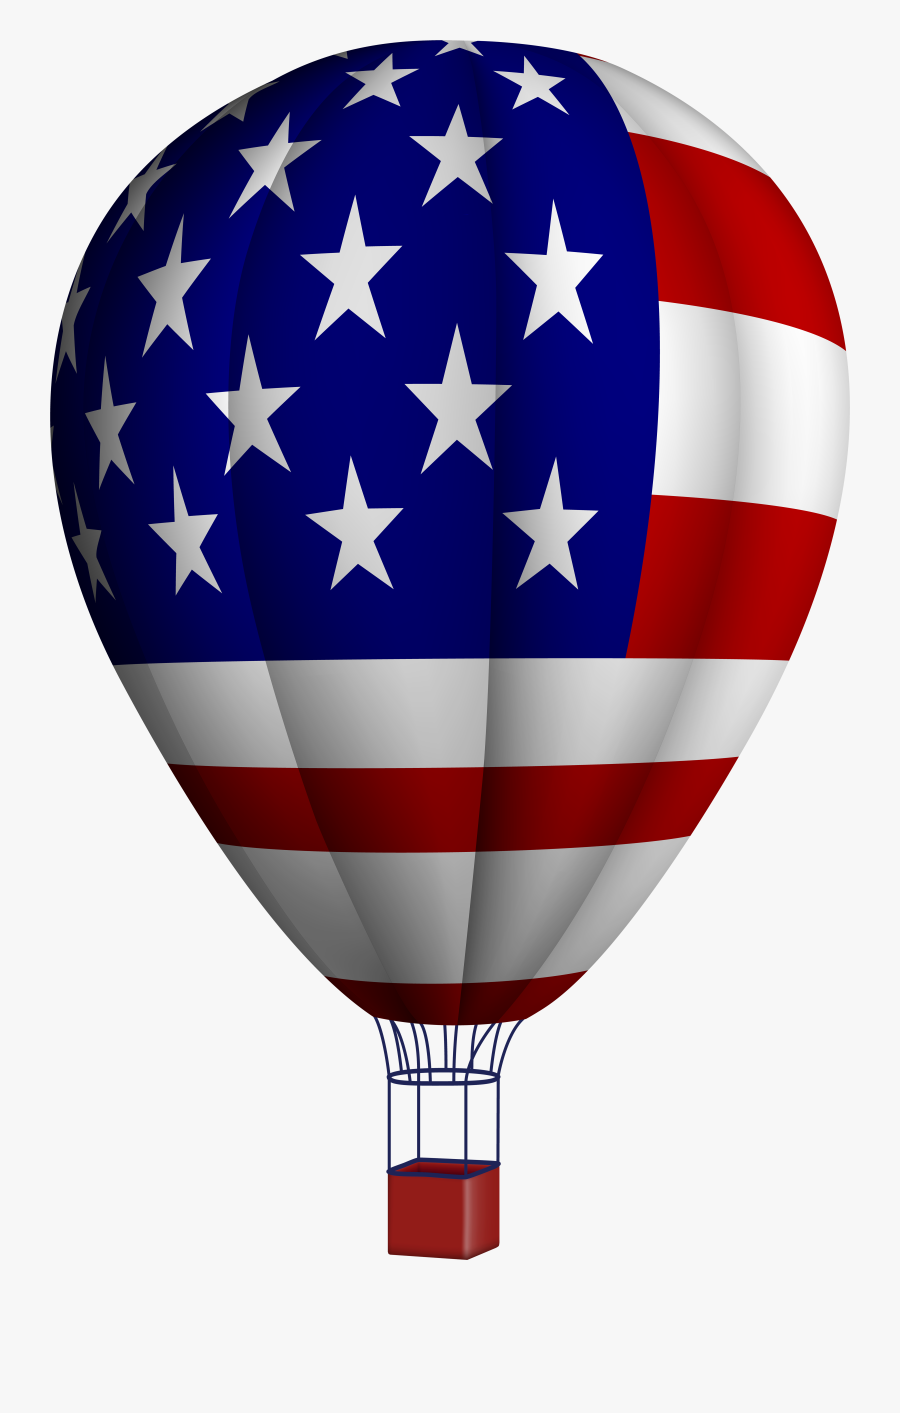 Usa Air Baloon Png Image - Major General Kevin B Schneider, Transparent Clipart